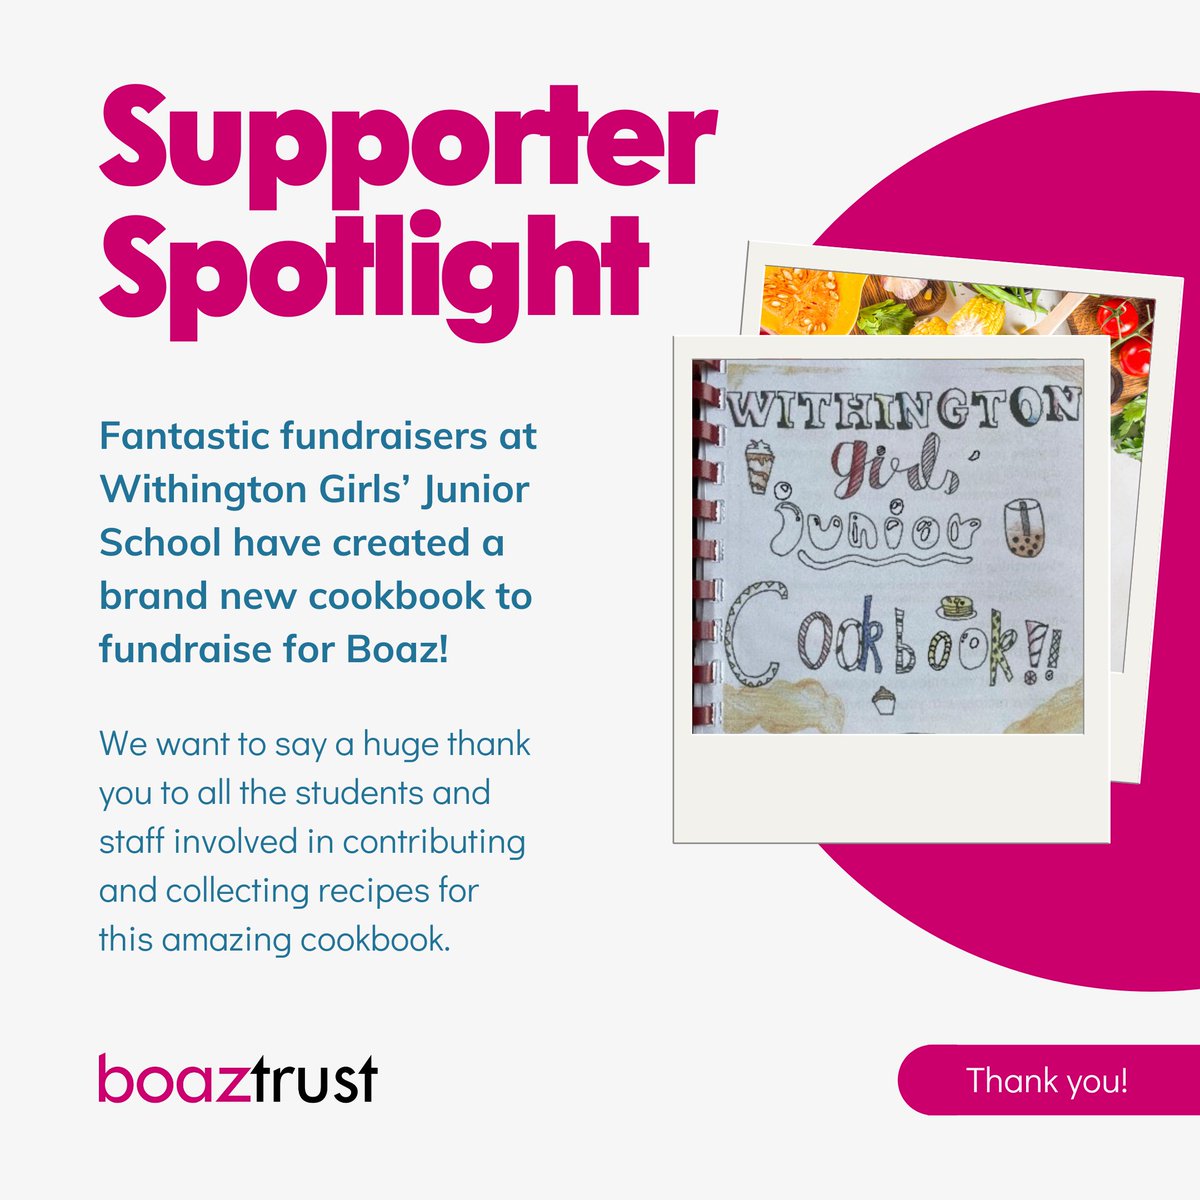 Big thank you to the students at @WGSJuniors who were involved in creating a brand new recipe book to fundraise for Boaz! 🧡 If you’ve been inspired, you can find more ideas and info about fundraising for our work here: rb.gy/n6dp67 #RefugeesWelcome #EndDestitution